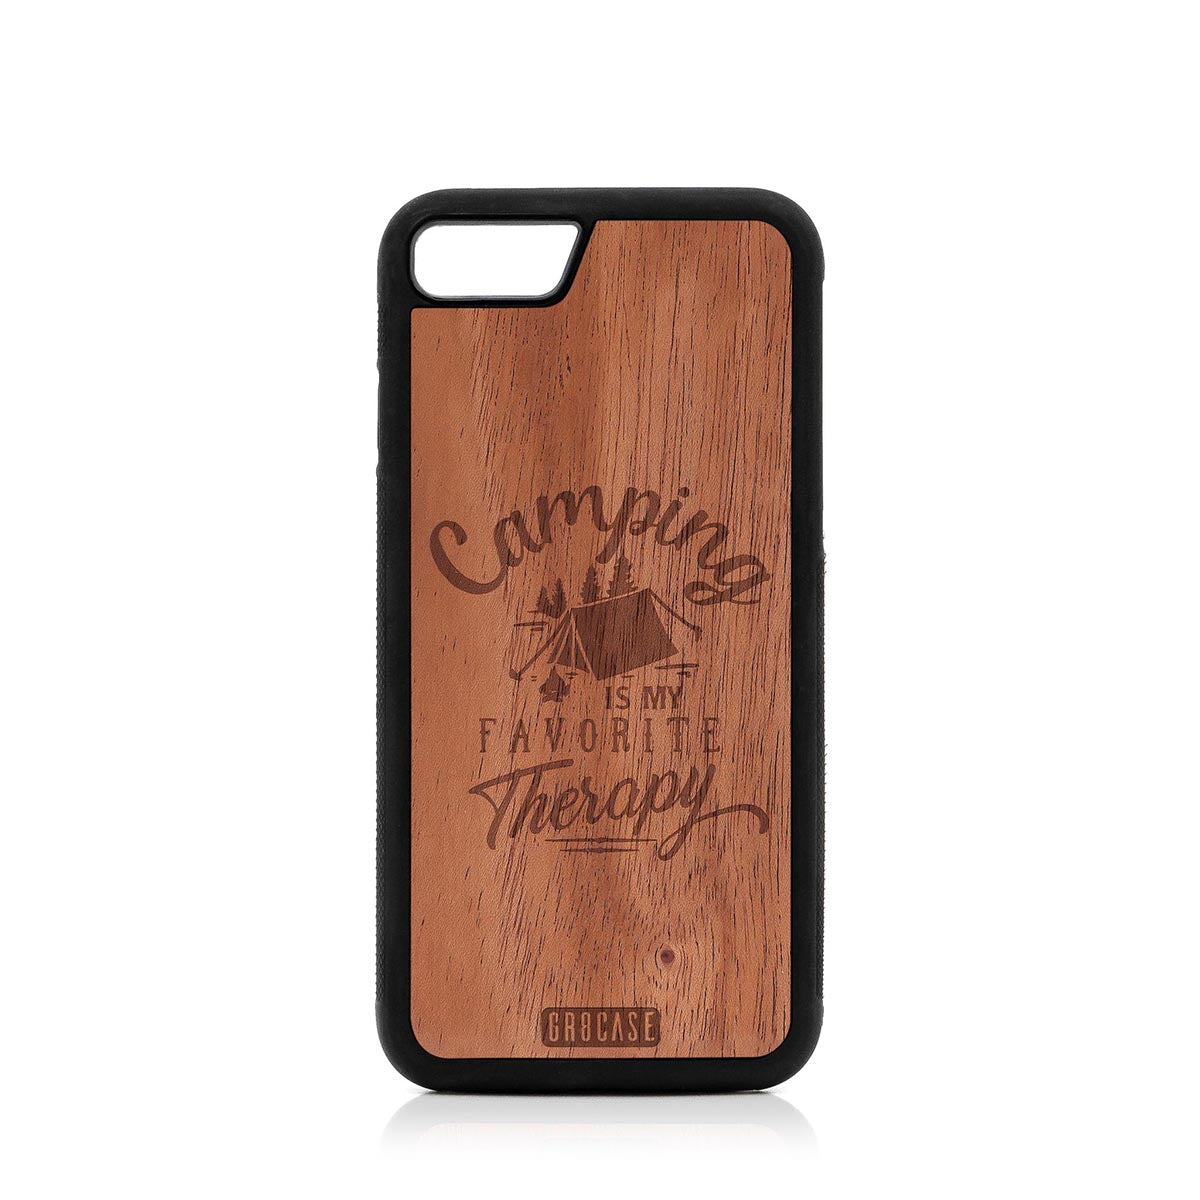 Camping Is My Favorite Therapy Design Wood Case For iPhone 7/8 by GR8CASE